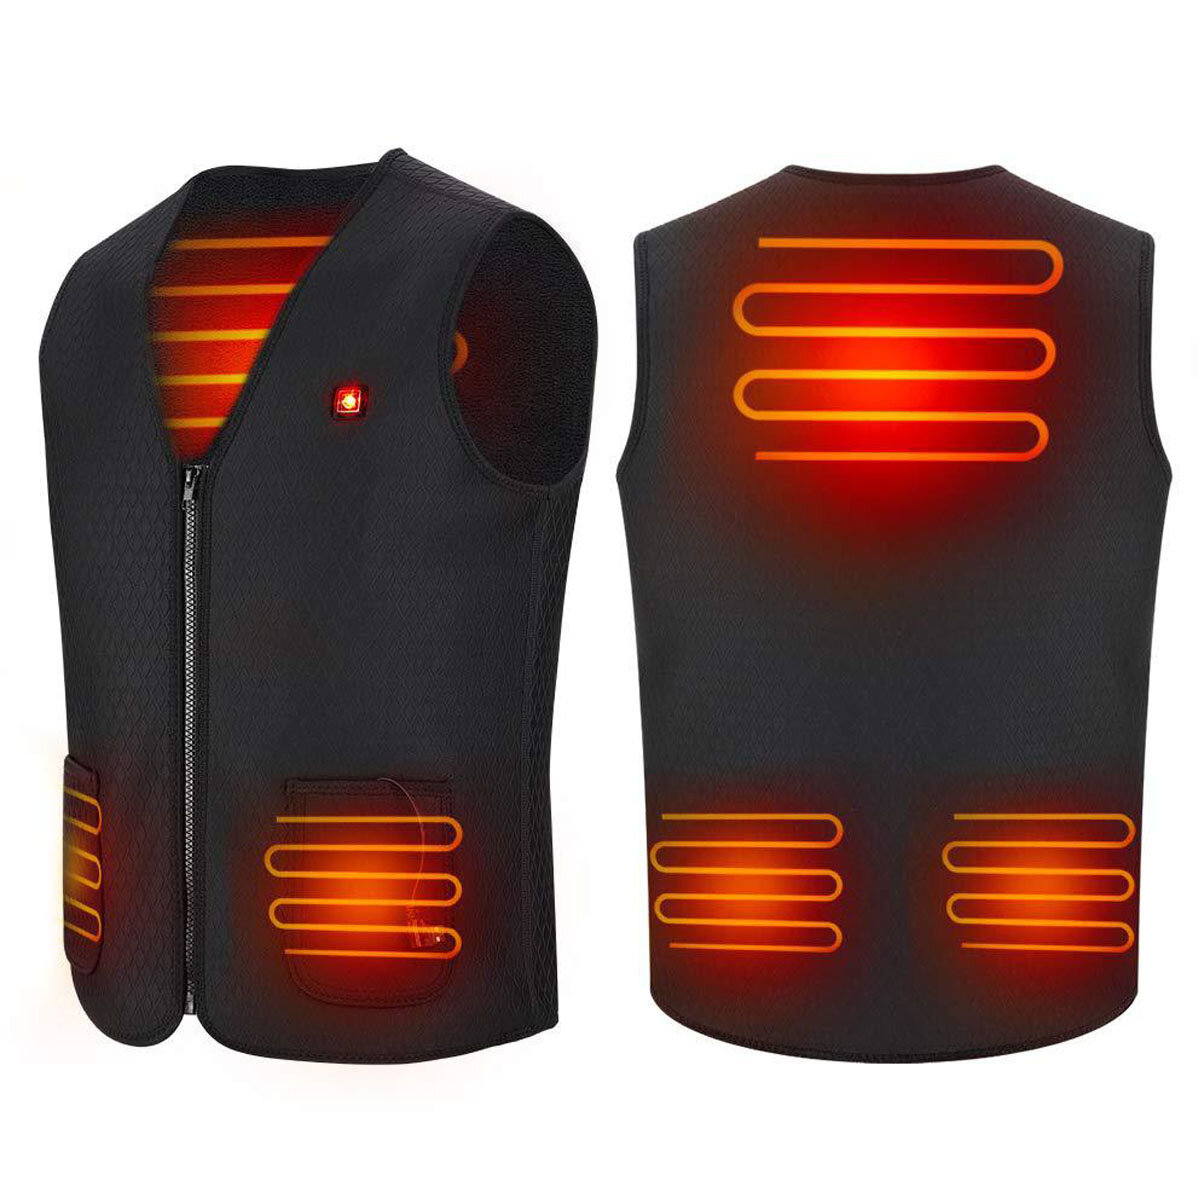 Electric Heated Vest 3 Modes Adjustable USB Rechargeable Winter Warm Heating Jacket Washable Outdoor